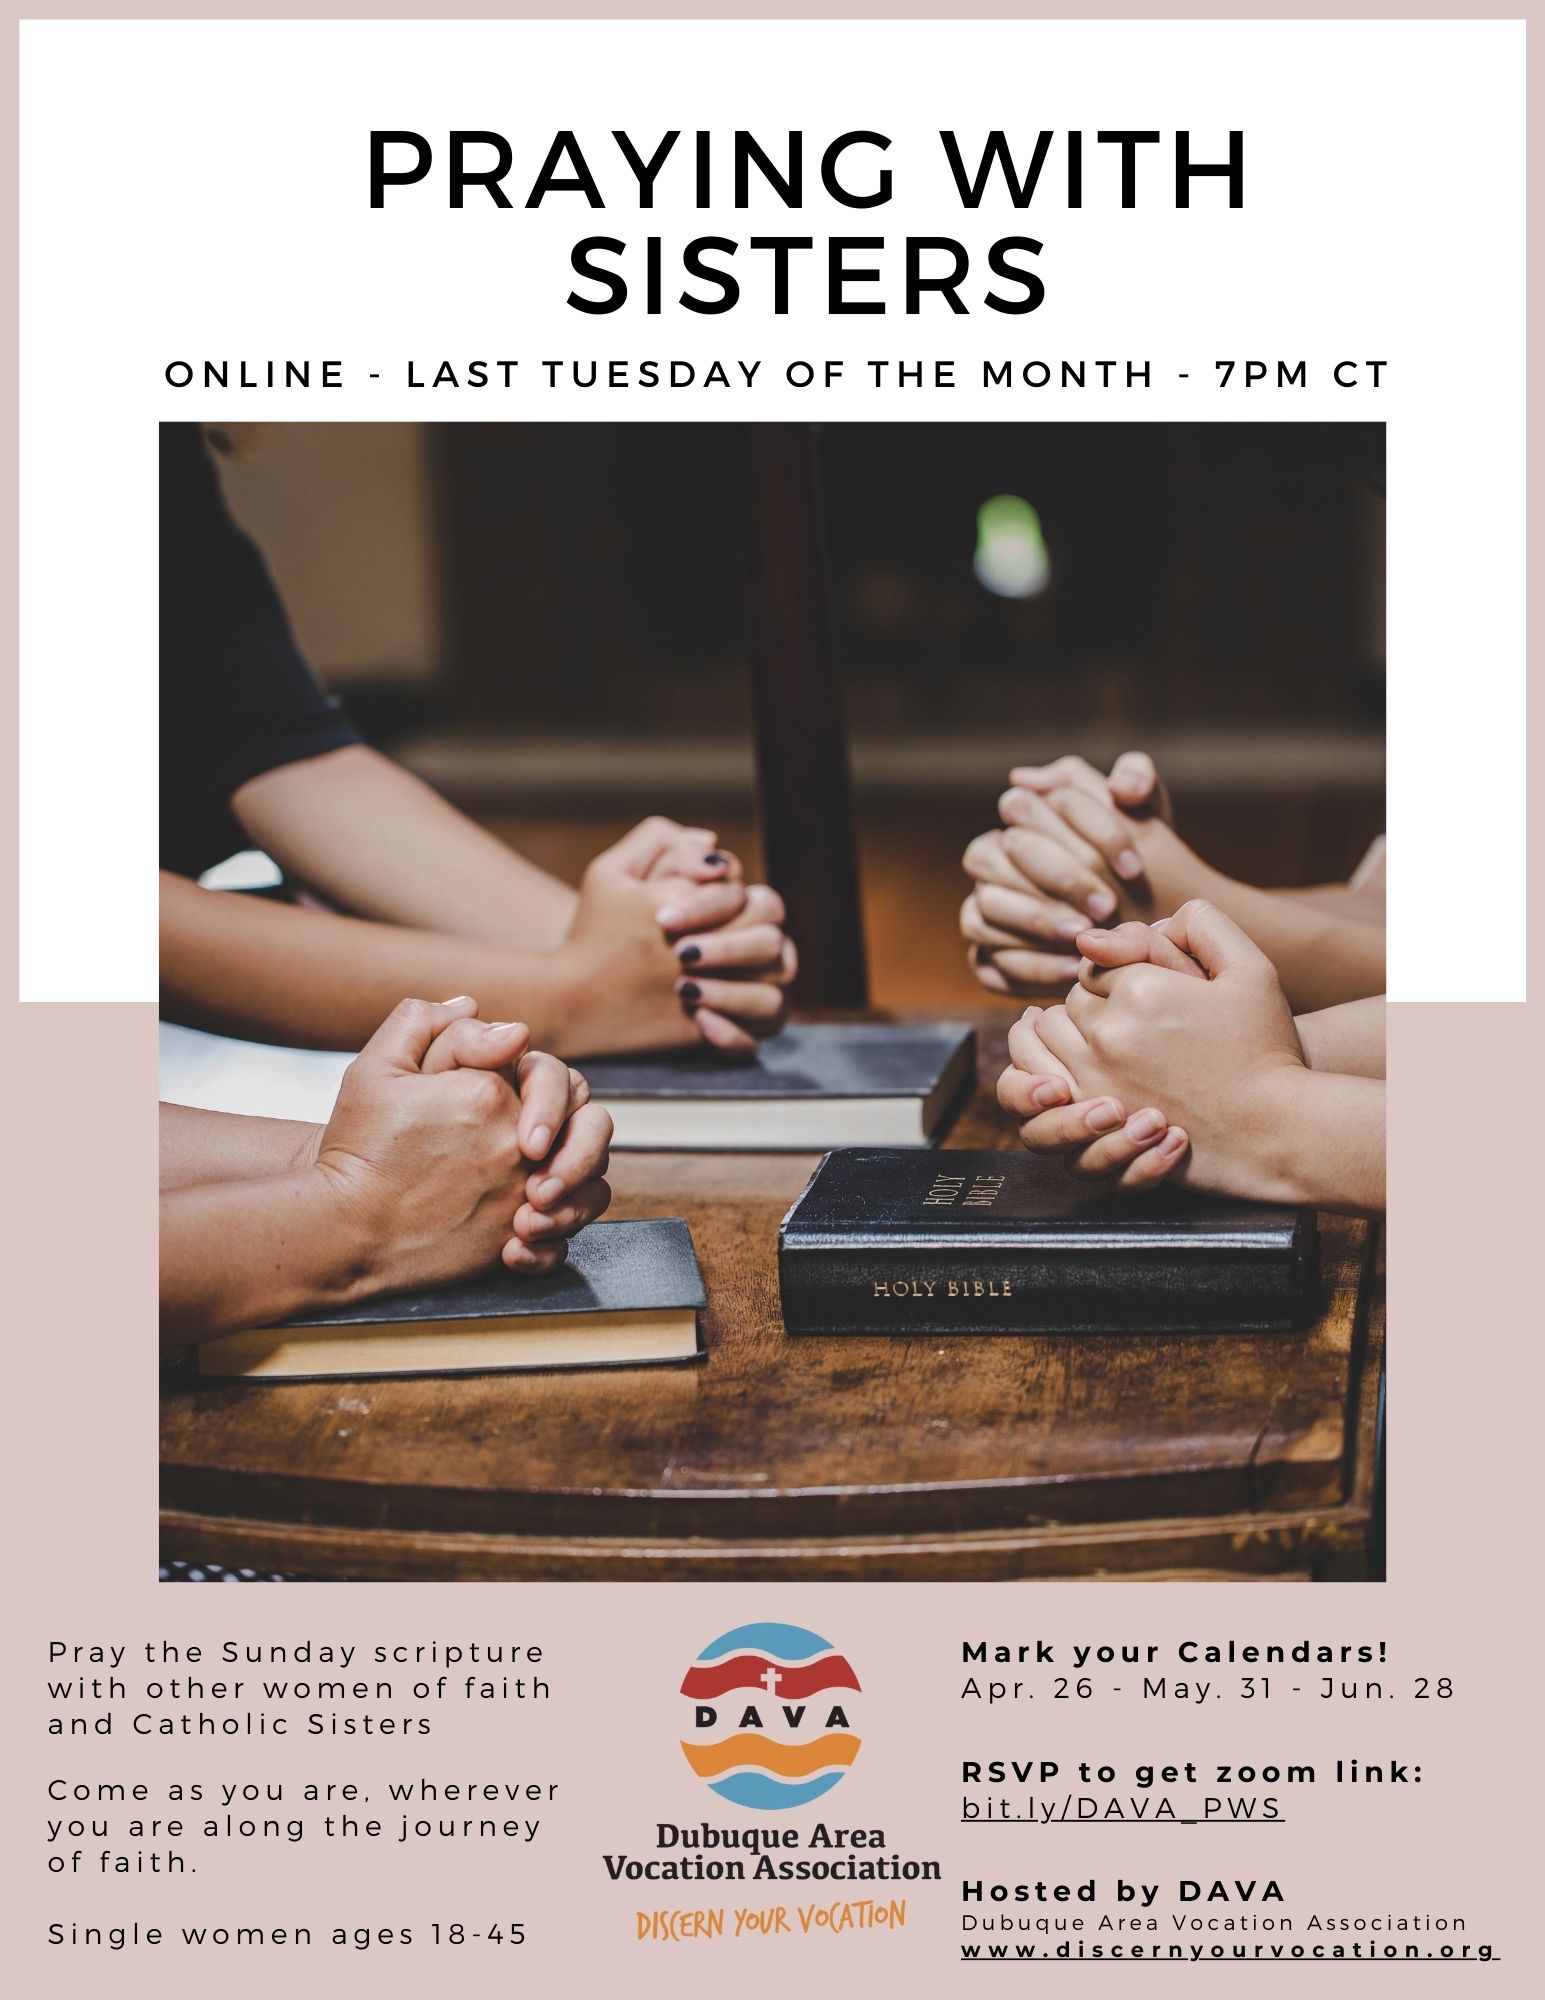 Praying with the Sisters